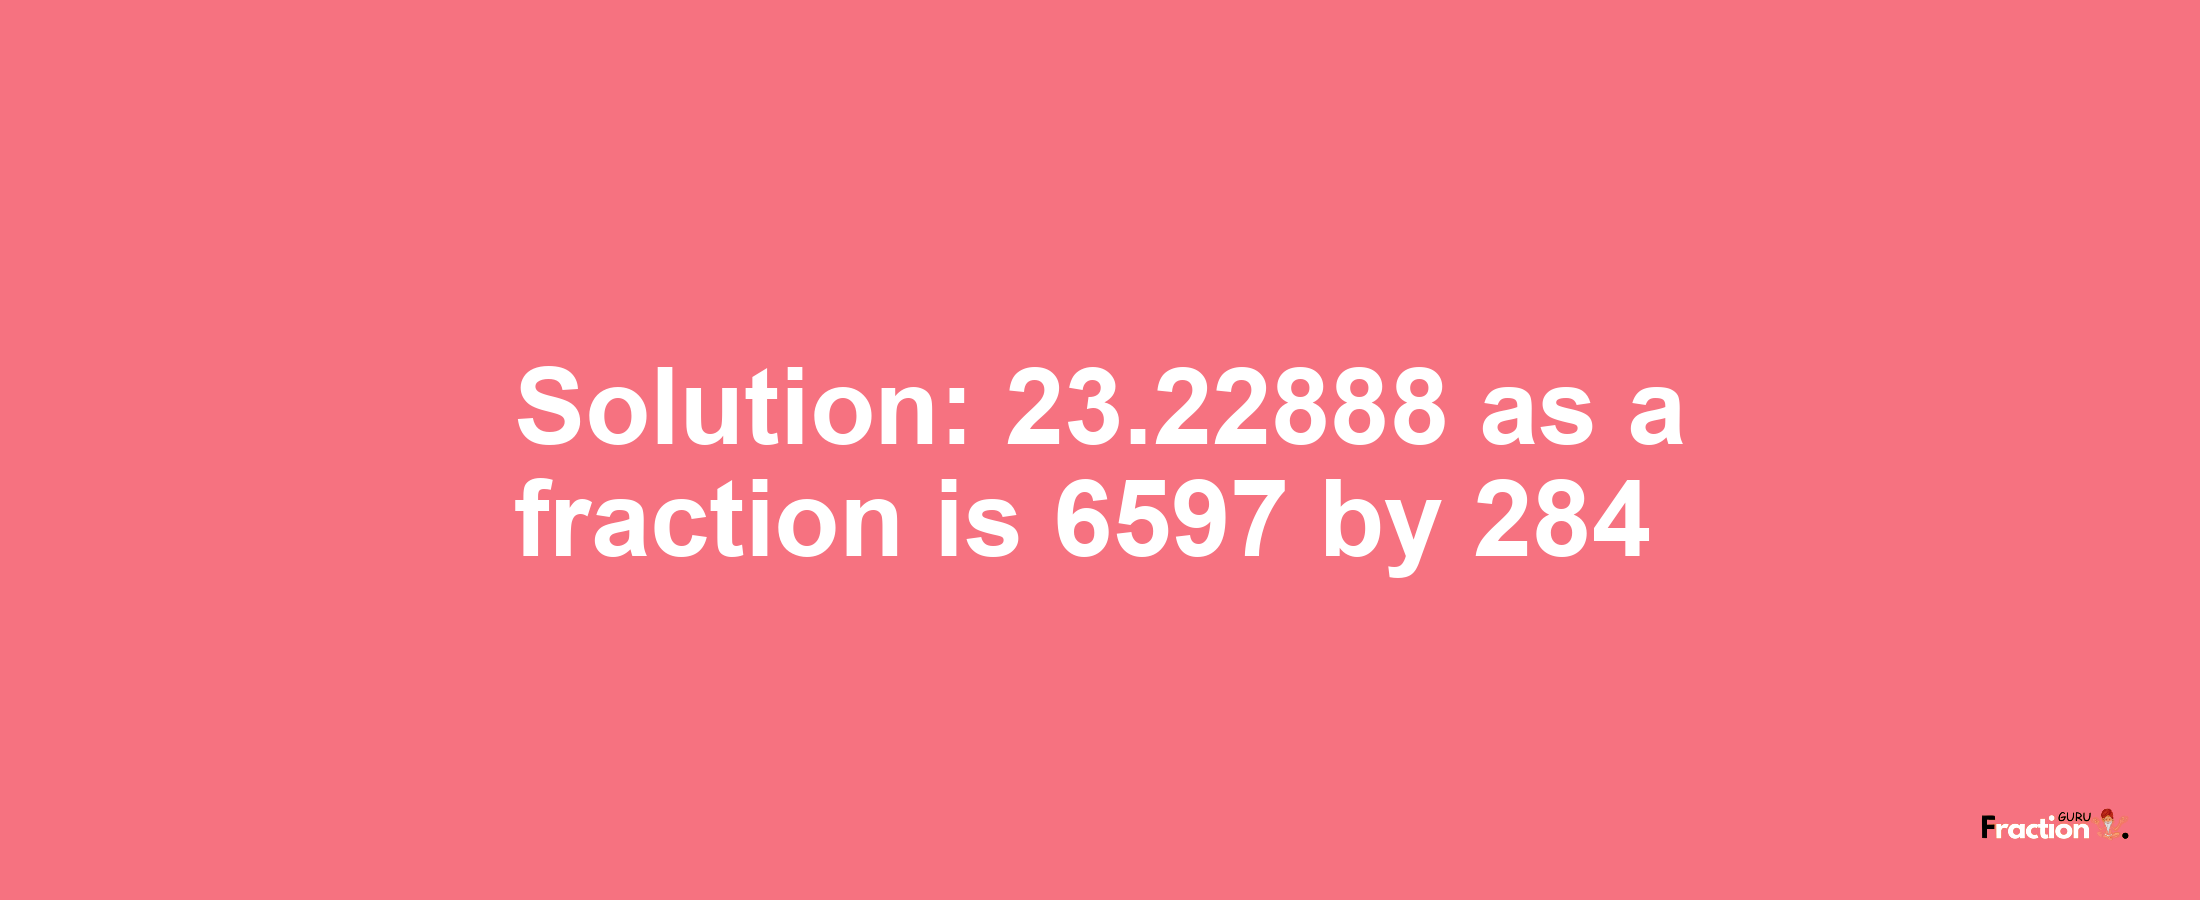 Solution:23.22888 as a fraction is 6597/284